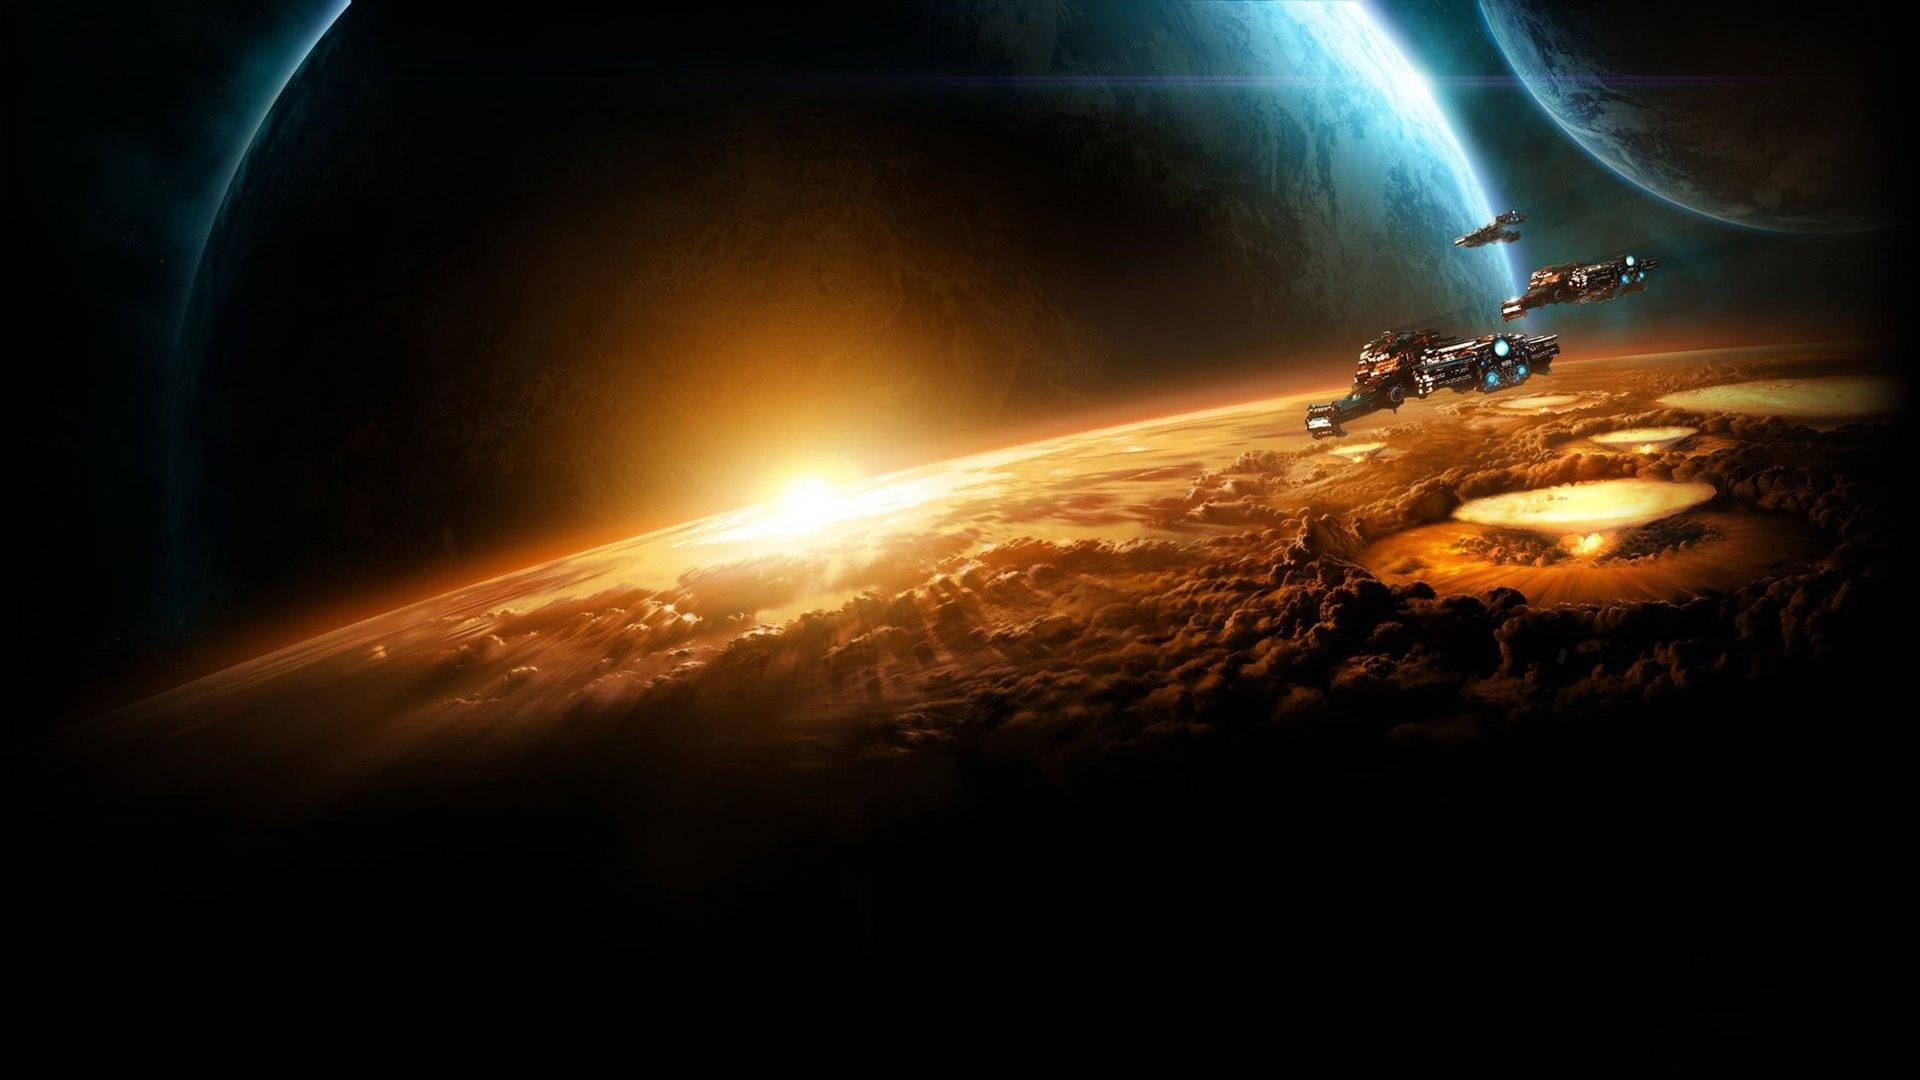 Space Ships In The Atmosphere 4K Starcraft Wallpaper